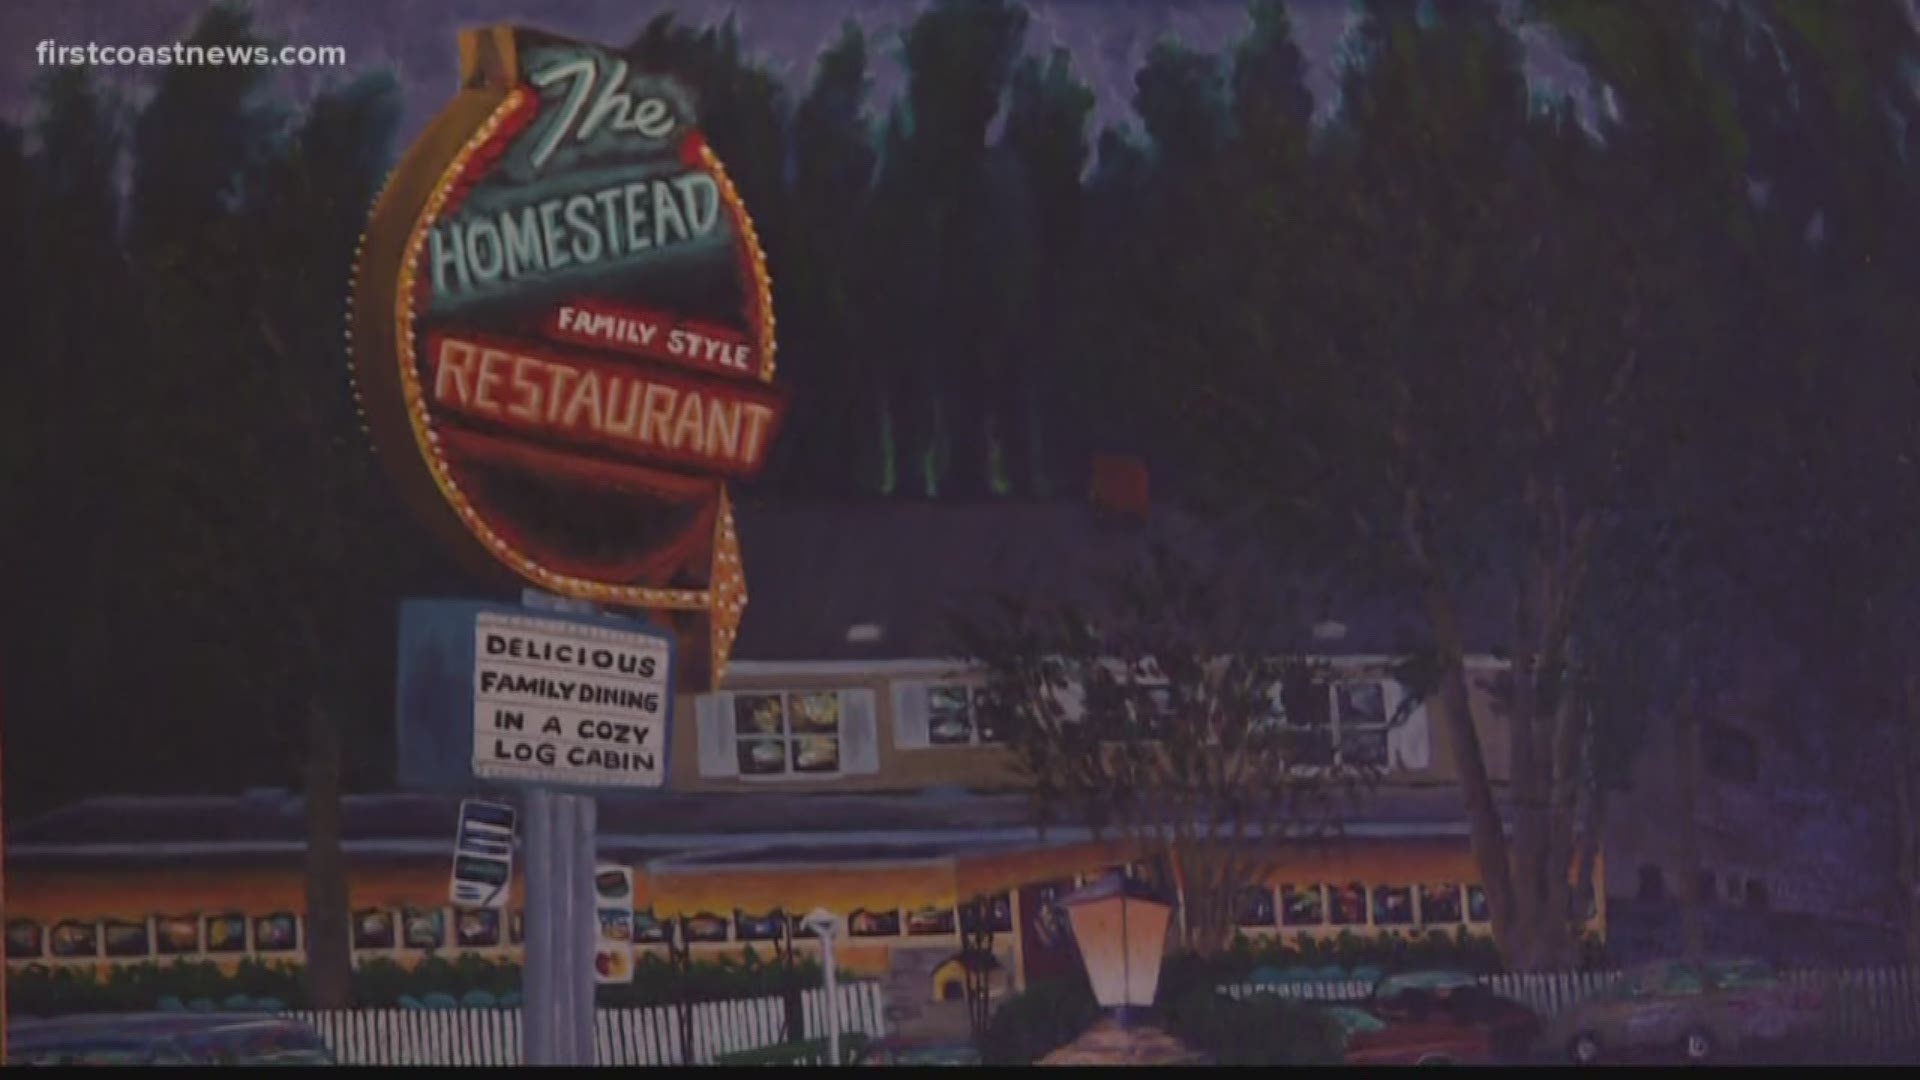 The Homestead Restaurant closed its doors a decade ago, but now it's back open.